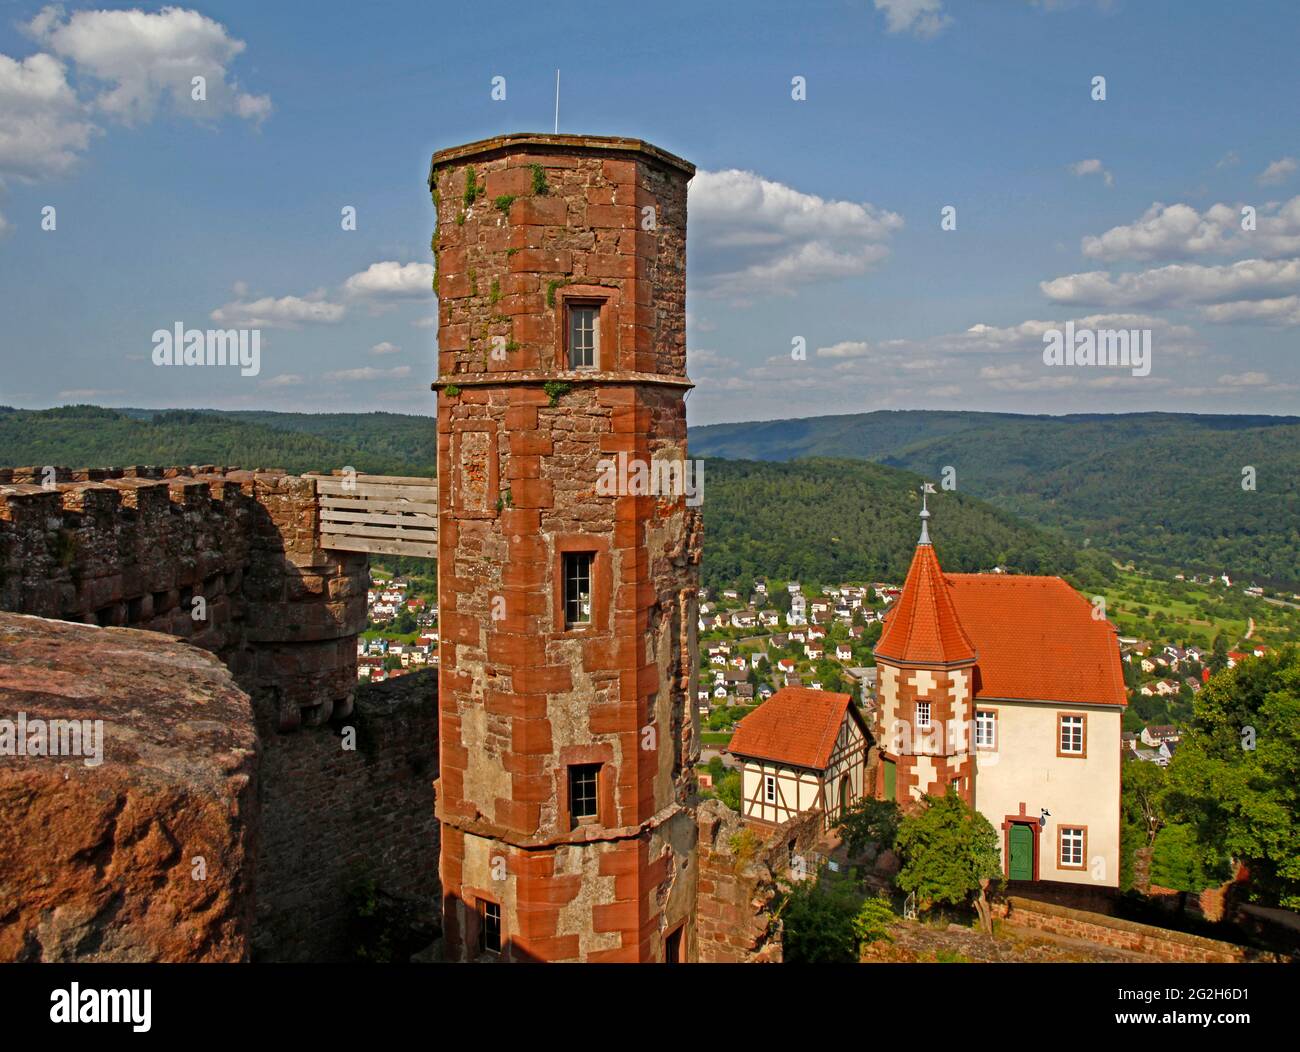 the mountain fortress with the hexagonal stair tower and the commandant's house, Dilsberg, district of Neckargemünd, Baden-Württemberg, Germany Stock Photo